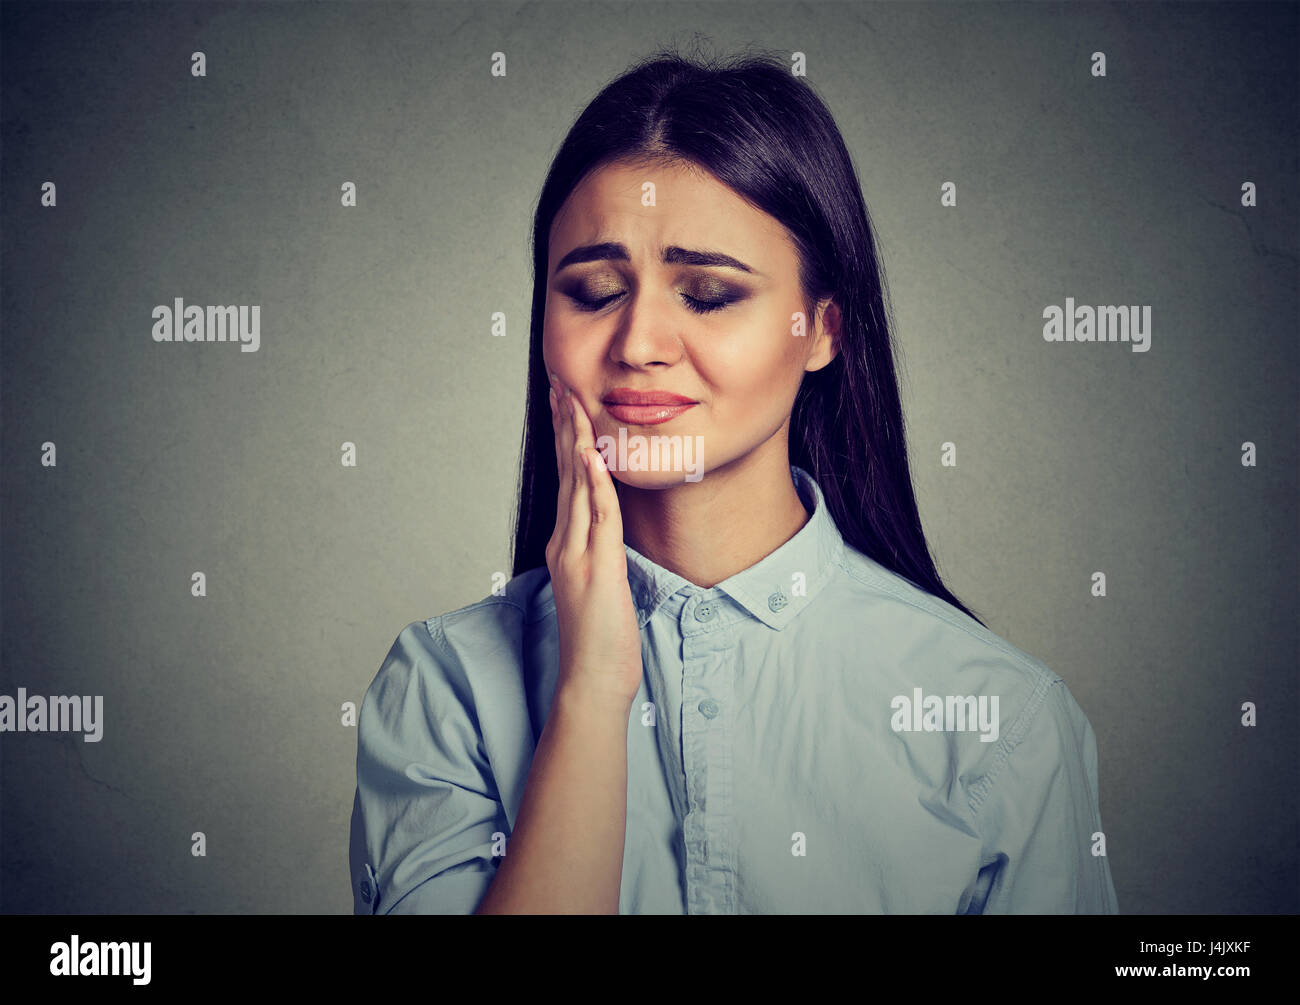 Woman with sensitive toothache crown problem suffering from pain touching outside mouth with hand isolated on gray background. Negative human emotion  Stock Photo